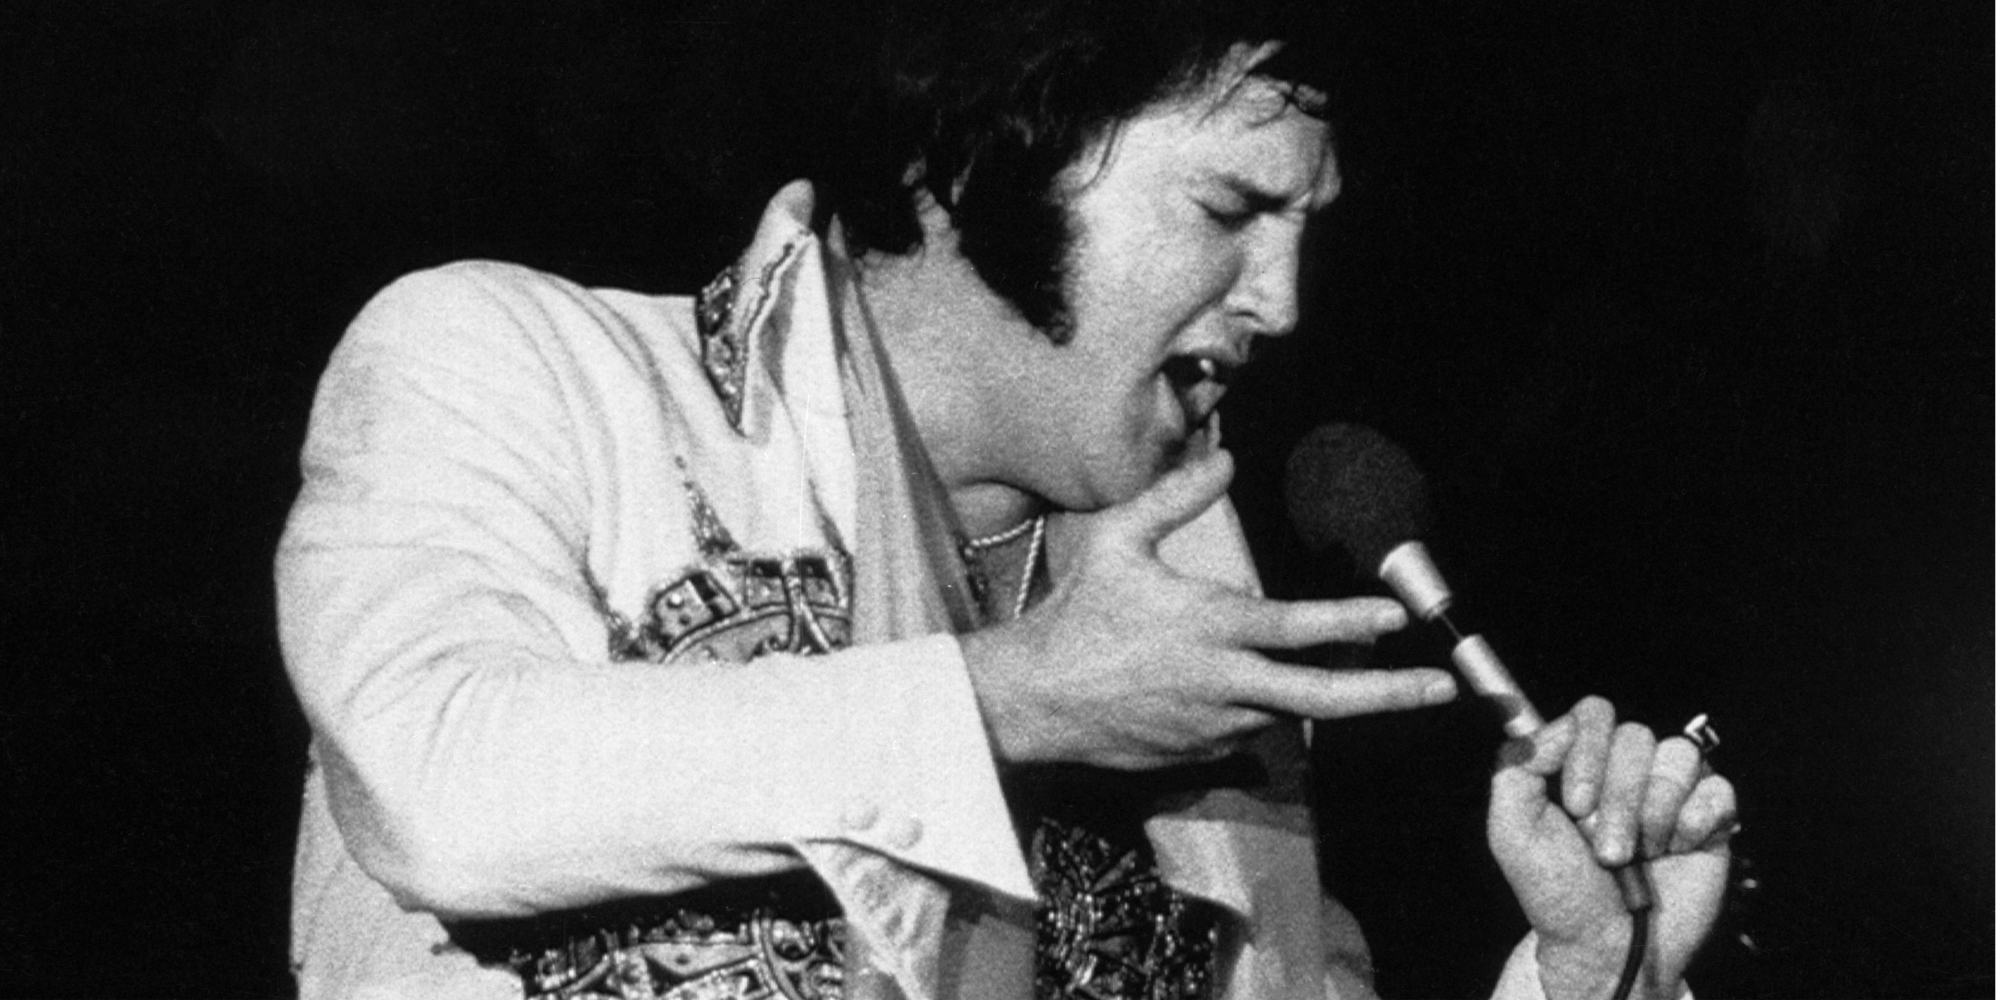 You are currently viewing Elvis Presley Made a Shocking Claim Ahead of His Death Says Author: ‘I Just Don’t Feel Good’